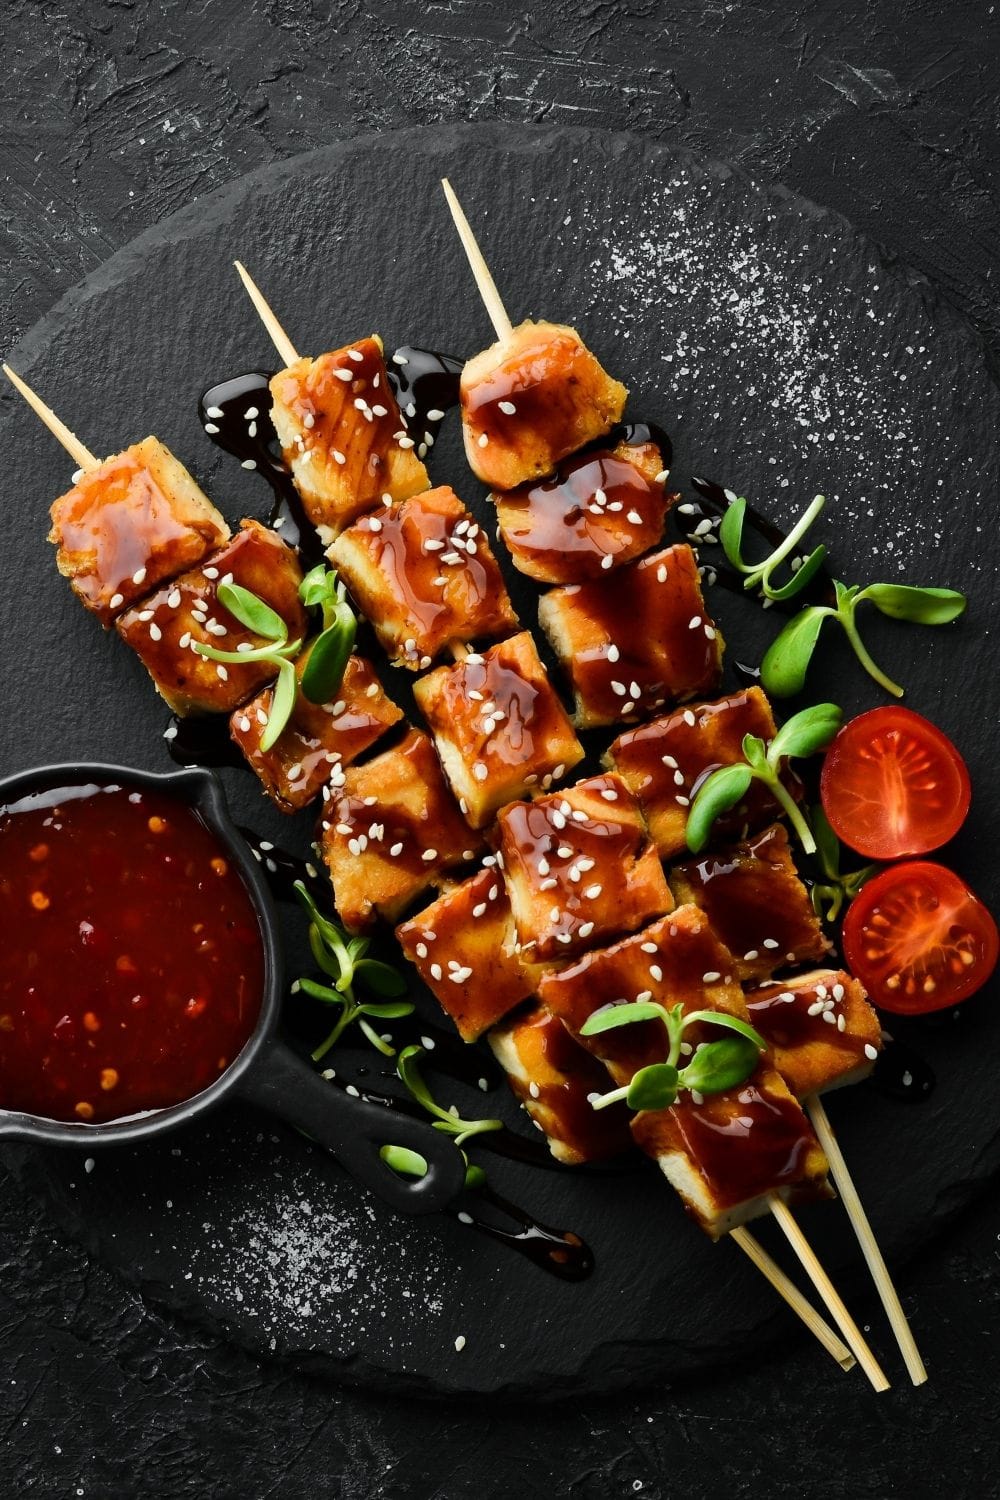 25 Skewer Appetizers for Any Party – Insanely Good Recipes